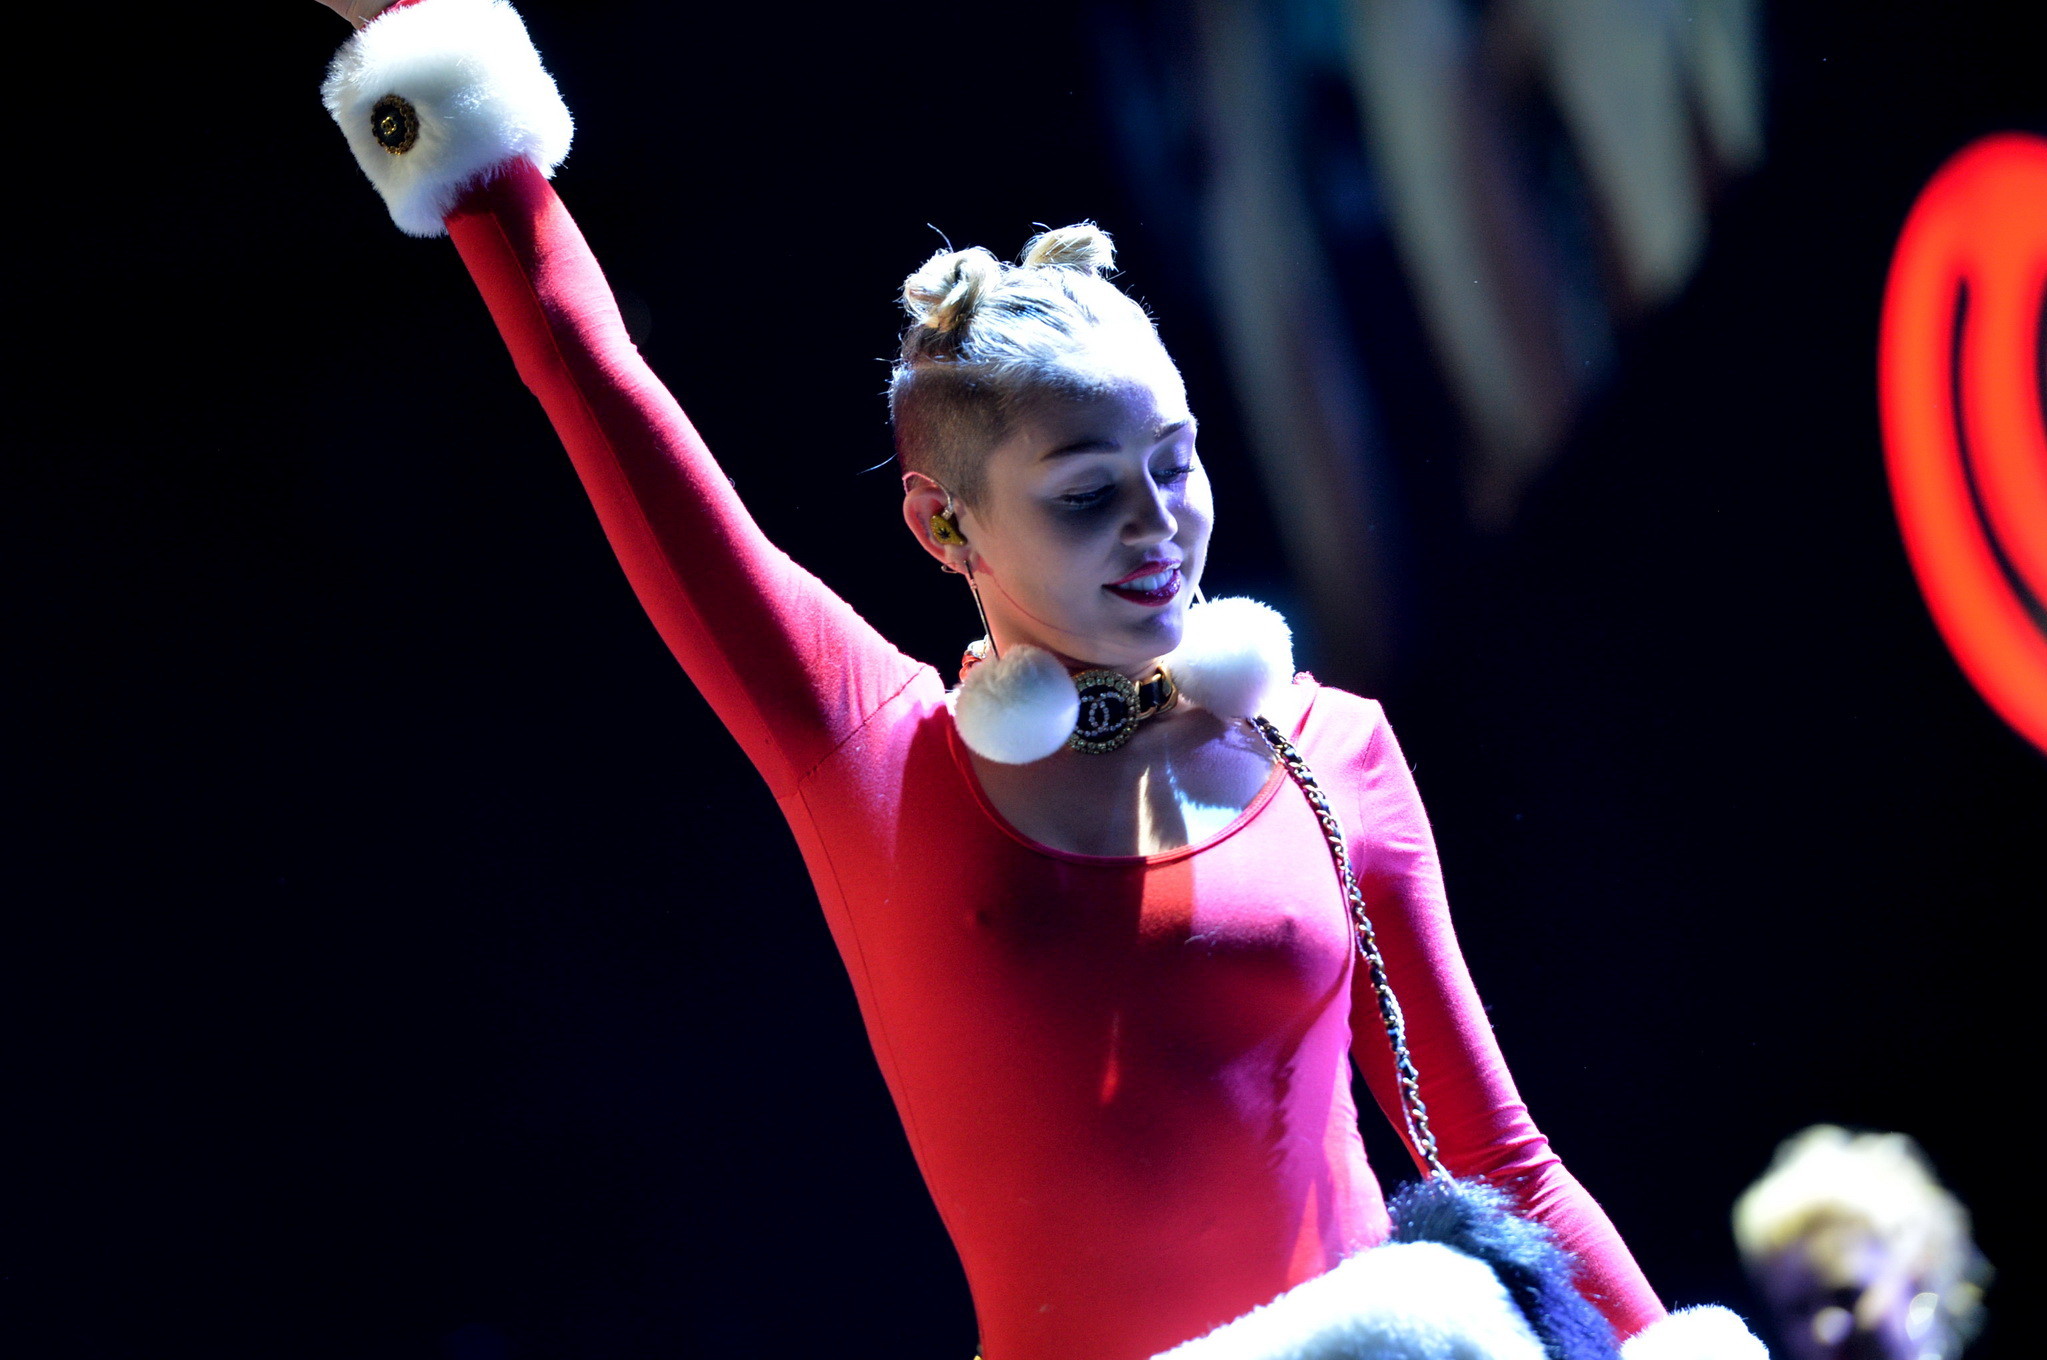 Miley Cyrus Shows Off Pokies And Ass Wearing A Red Leotard On Stage At 93.3 FLZ'